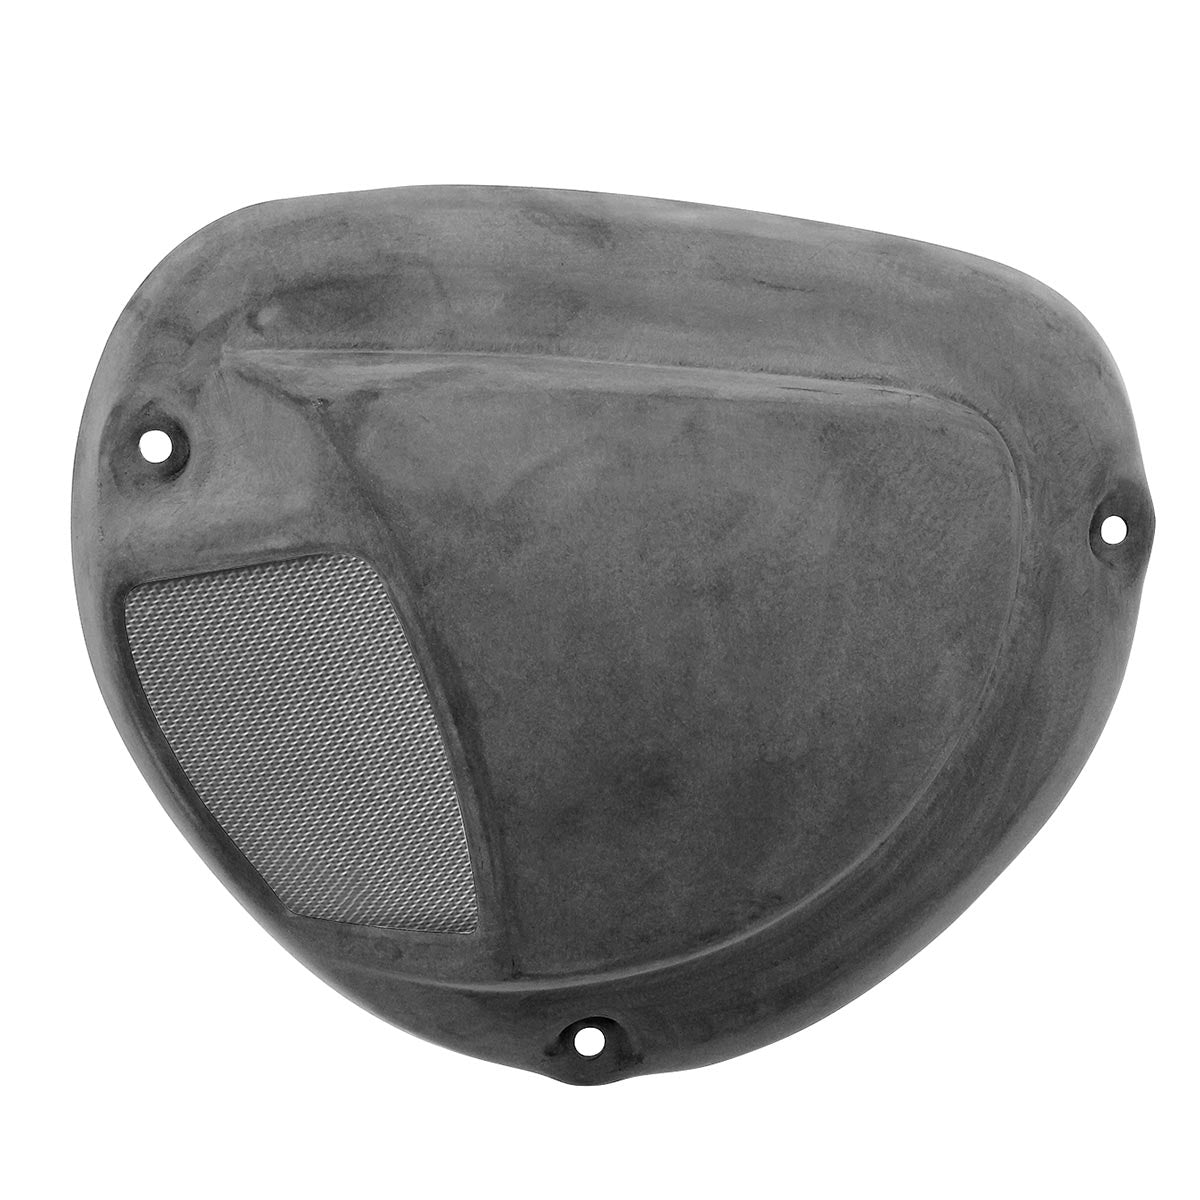 Pair of apint-ready ABS Reytelo Air Cleaner Cover for Indian® Motorcycles(Includes a paint-ready ABS Air Cleaner Cover)